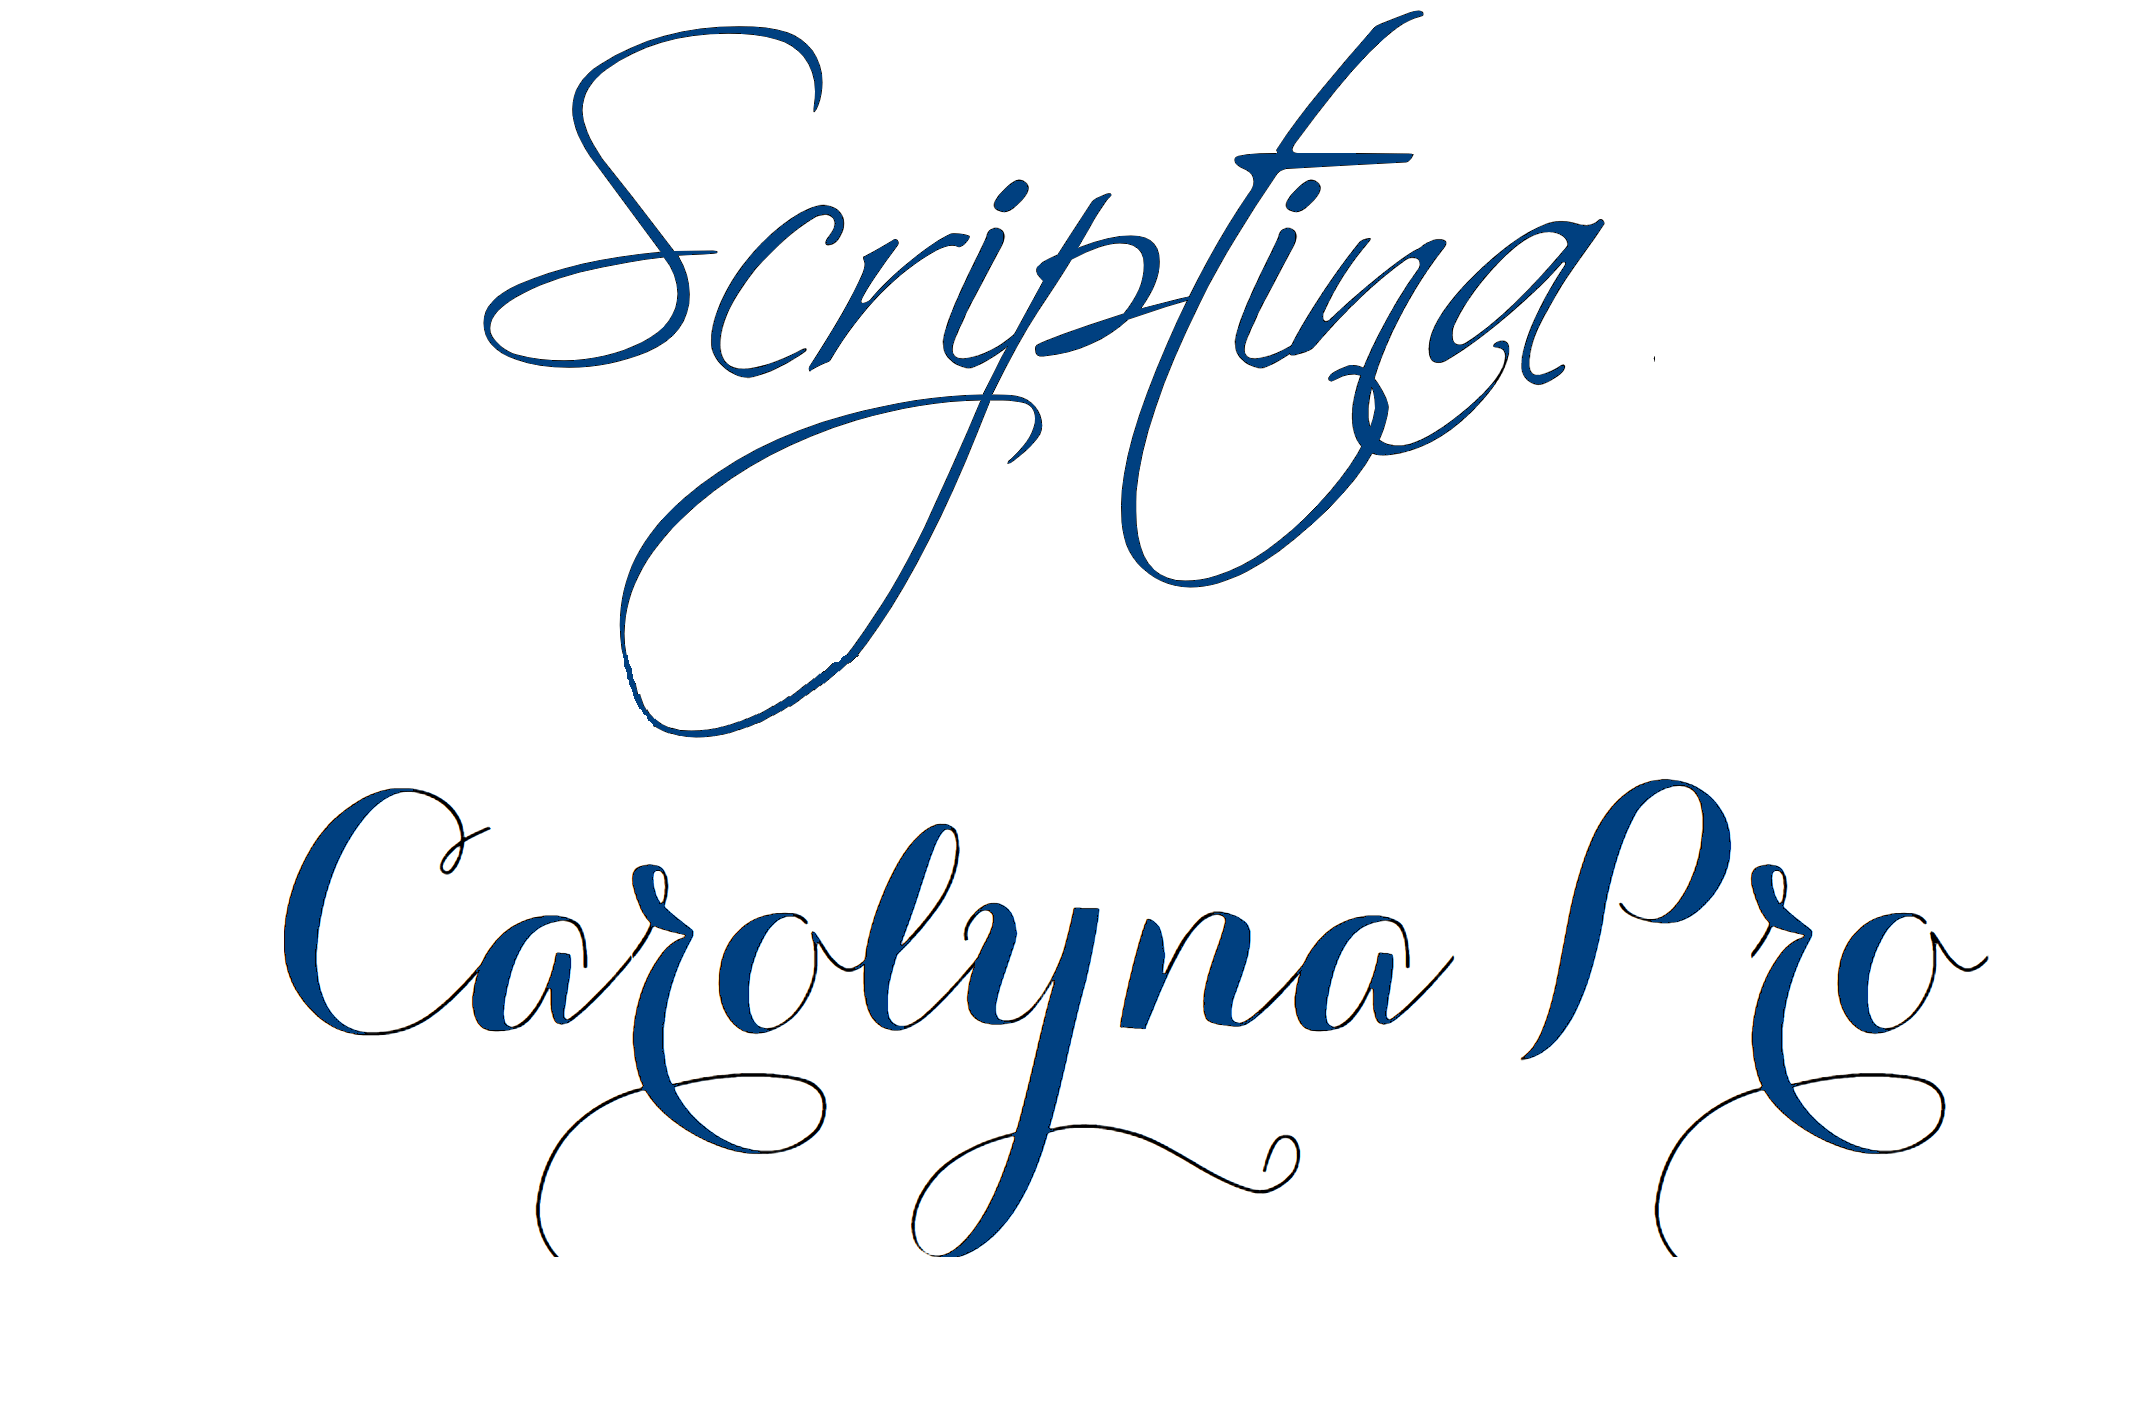 Examples of calligraphic scripts